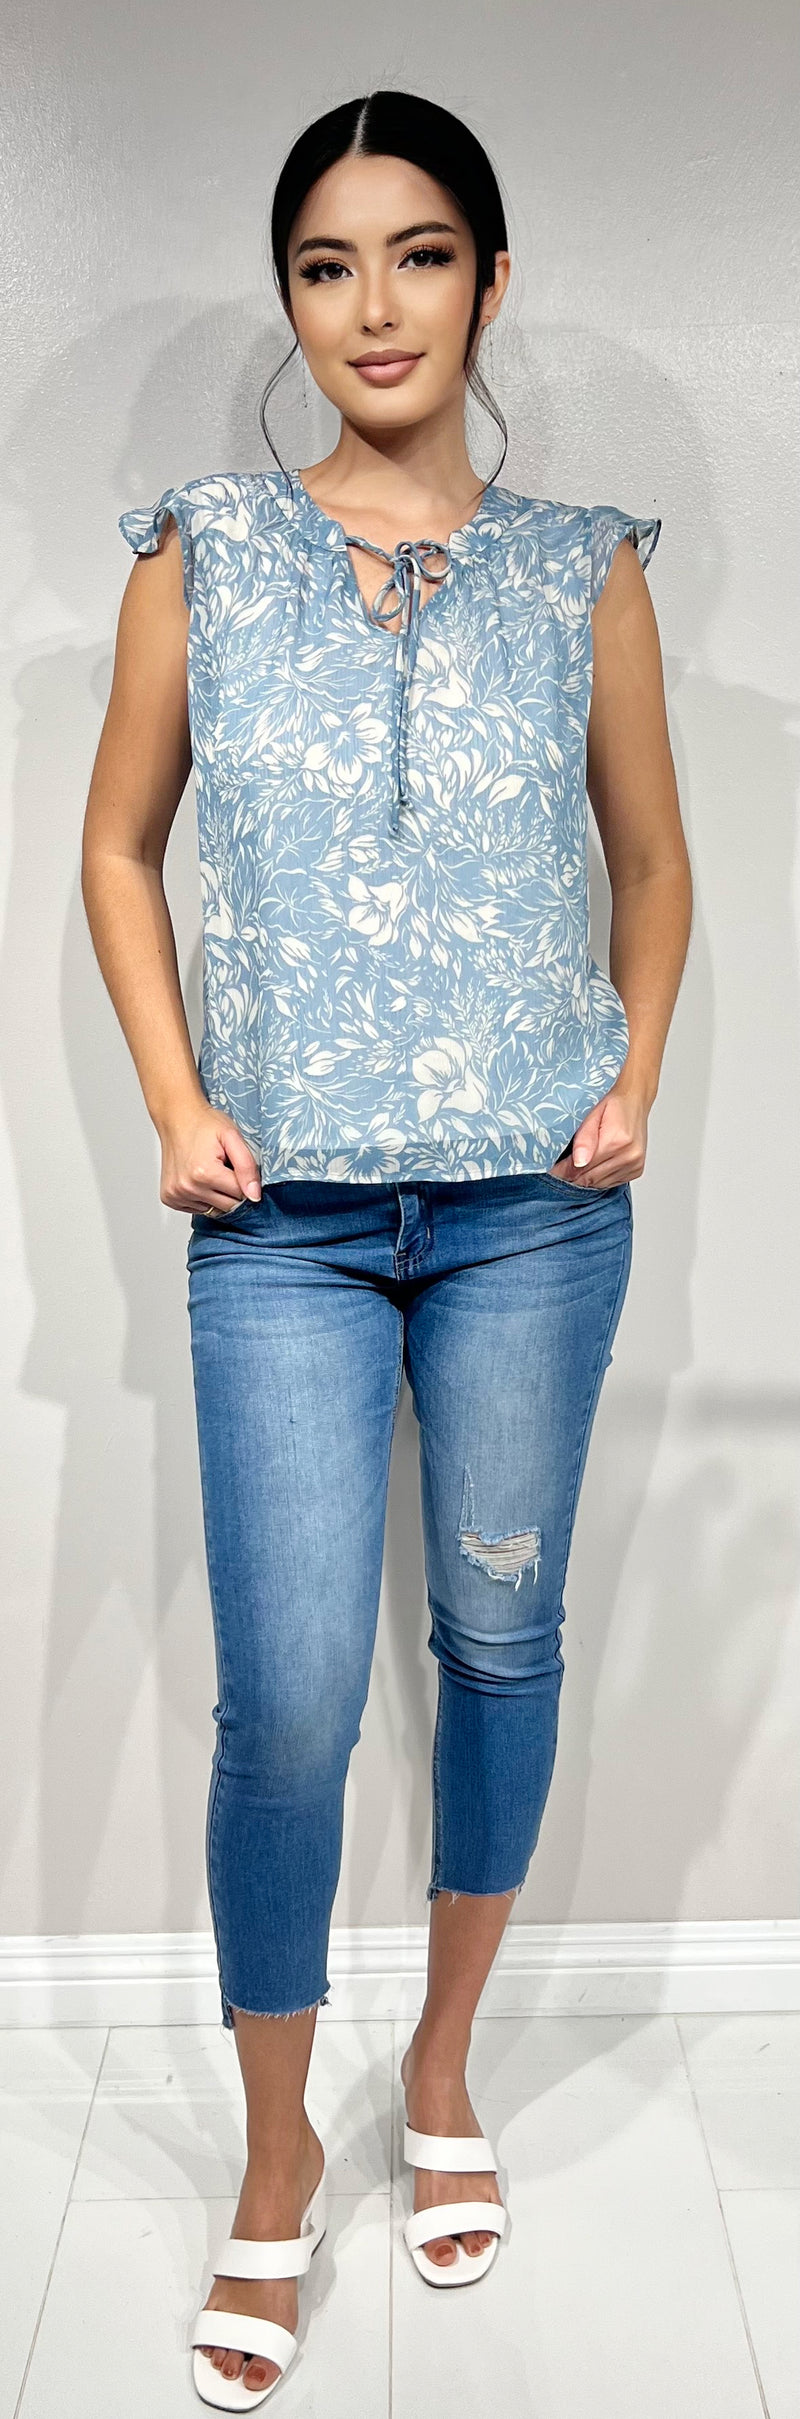 Jeans Warehouse Hawaii - S/S PRINT WOVEN TOPS - FLUTTER SLEEVE FLORAL TOP | By GILLI